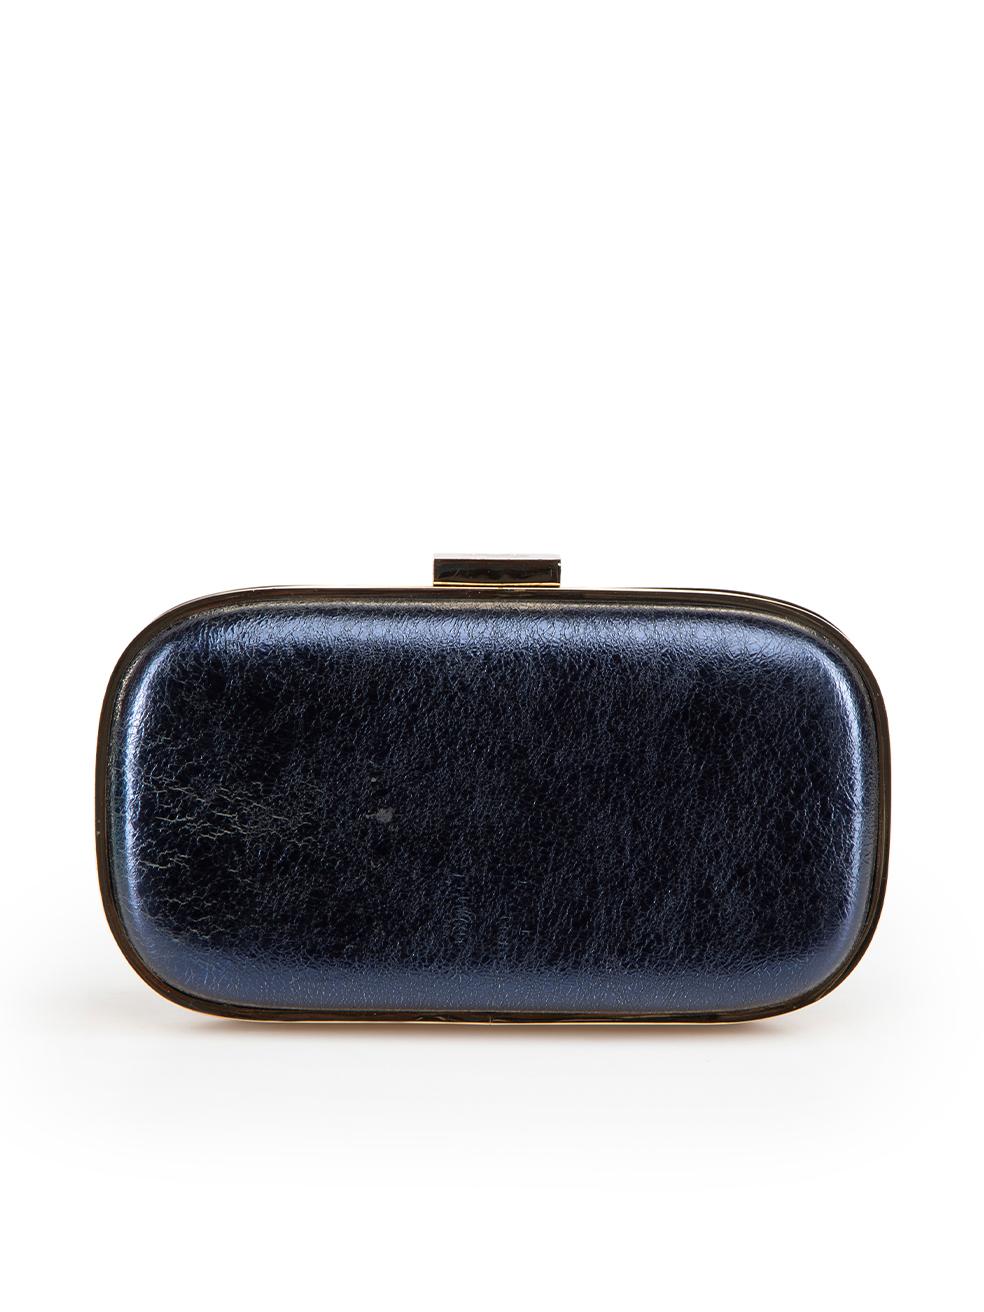 Anya Hindmarch Navy Marano Music Box Clutch In Good Condition For Sale In London, GB